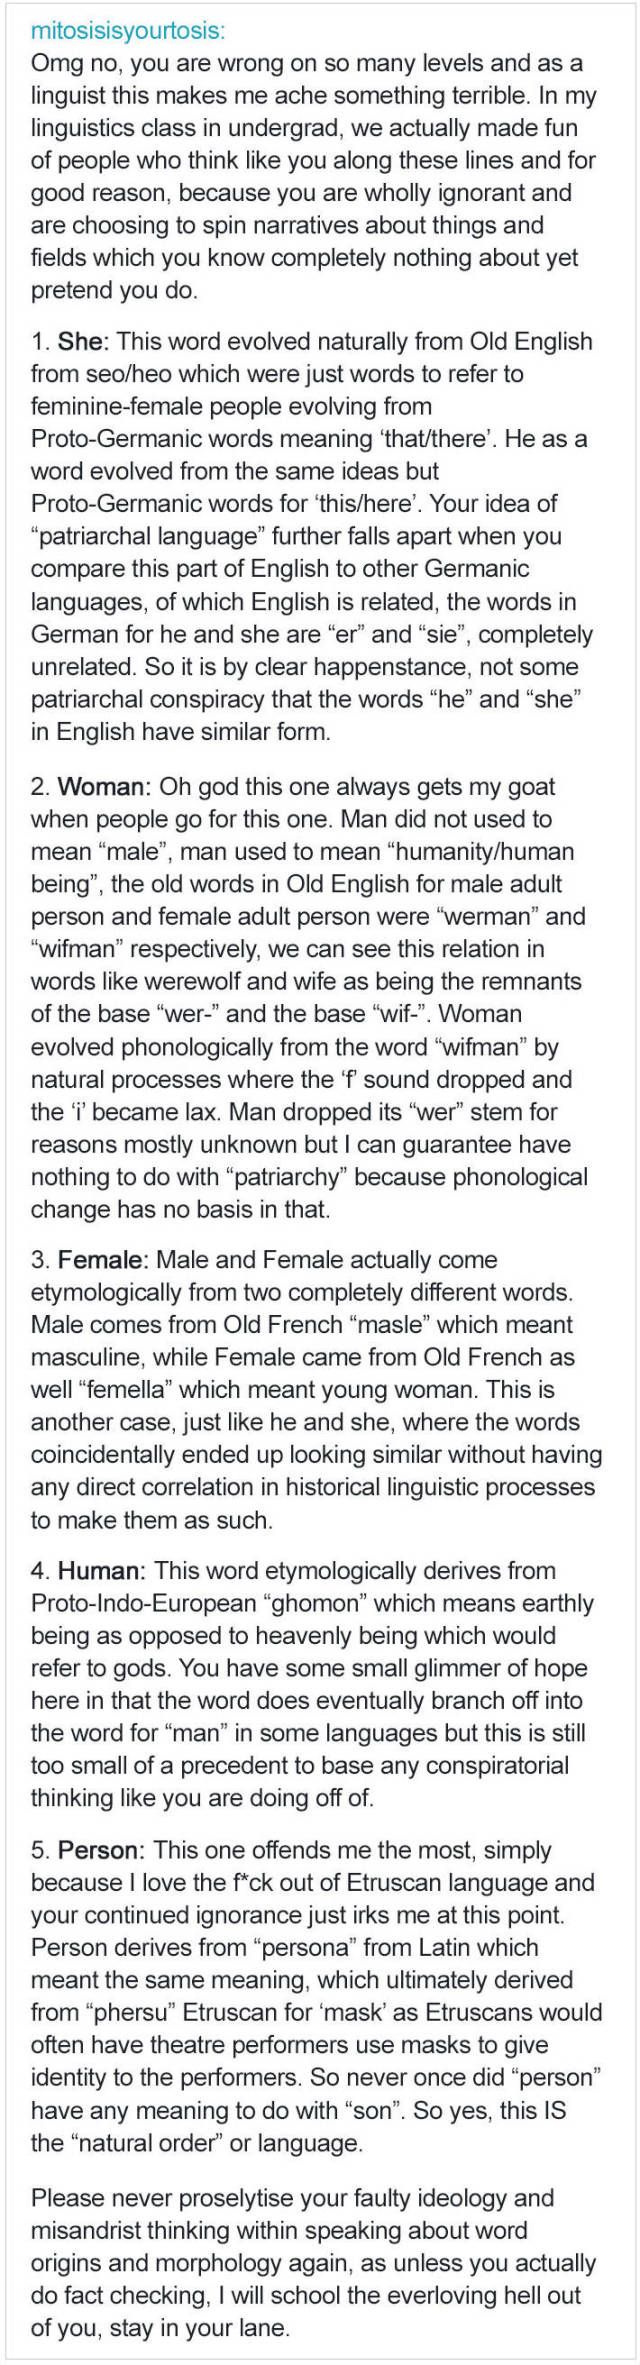 Woman Tried To Attack English Language For Being Sexist, Got Schooled By A Real Linguist